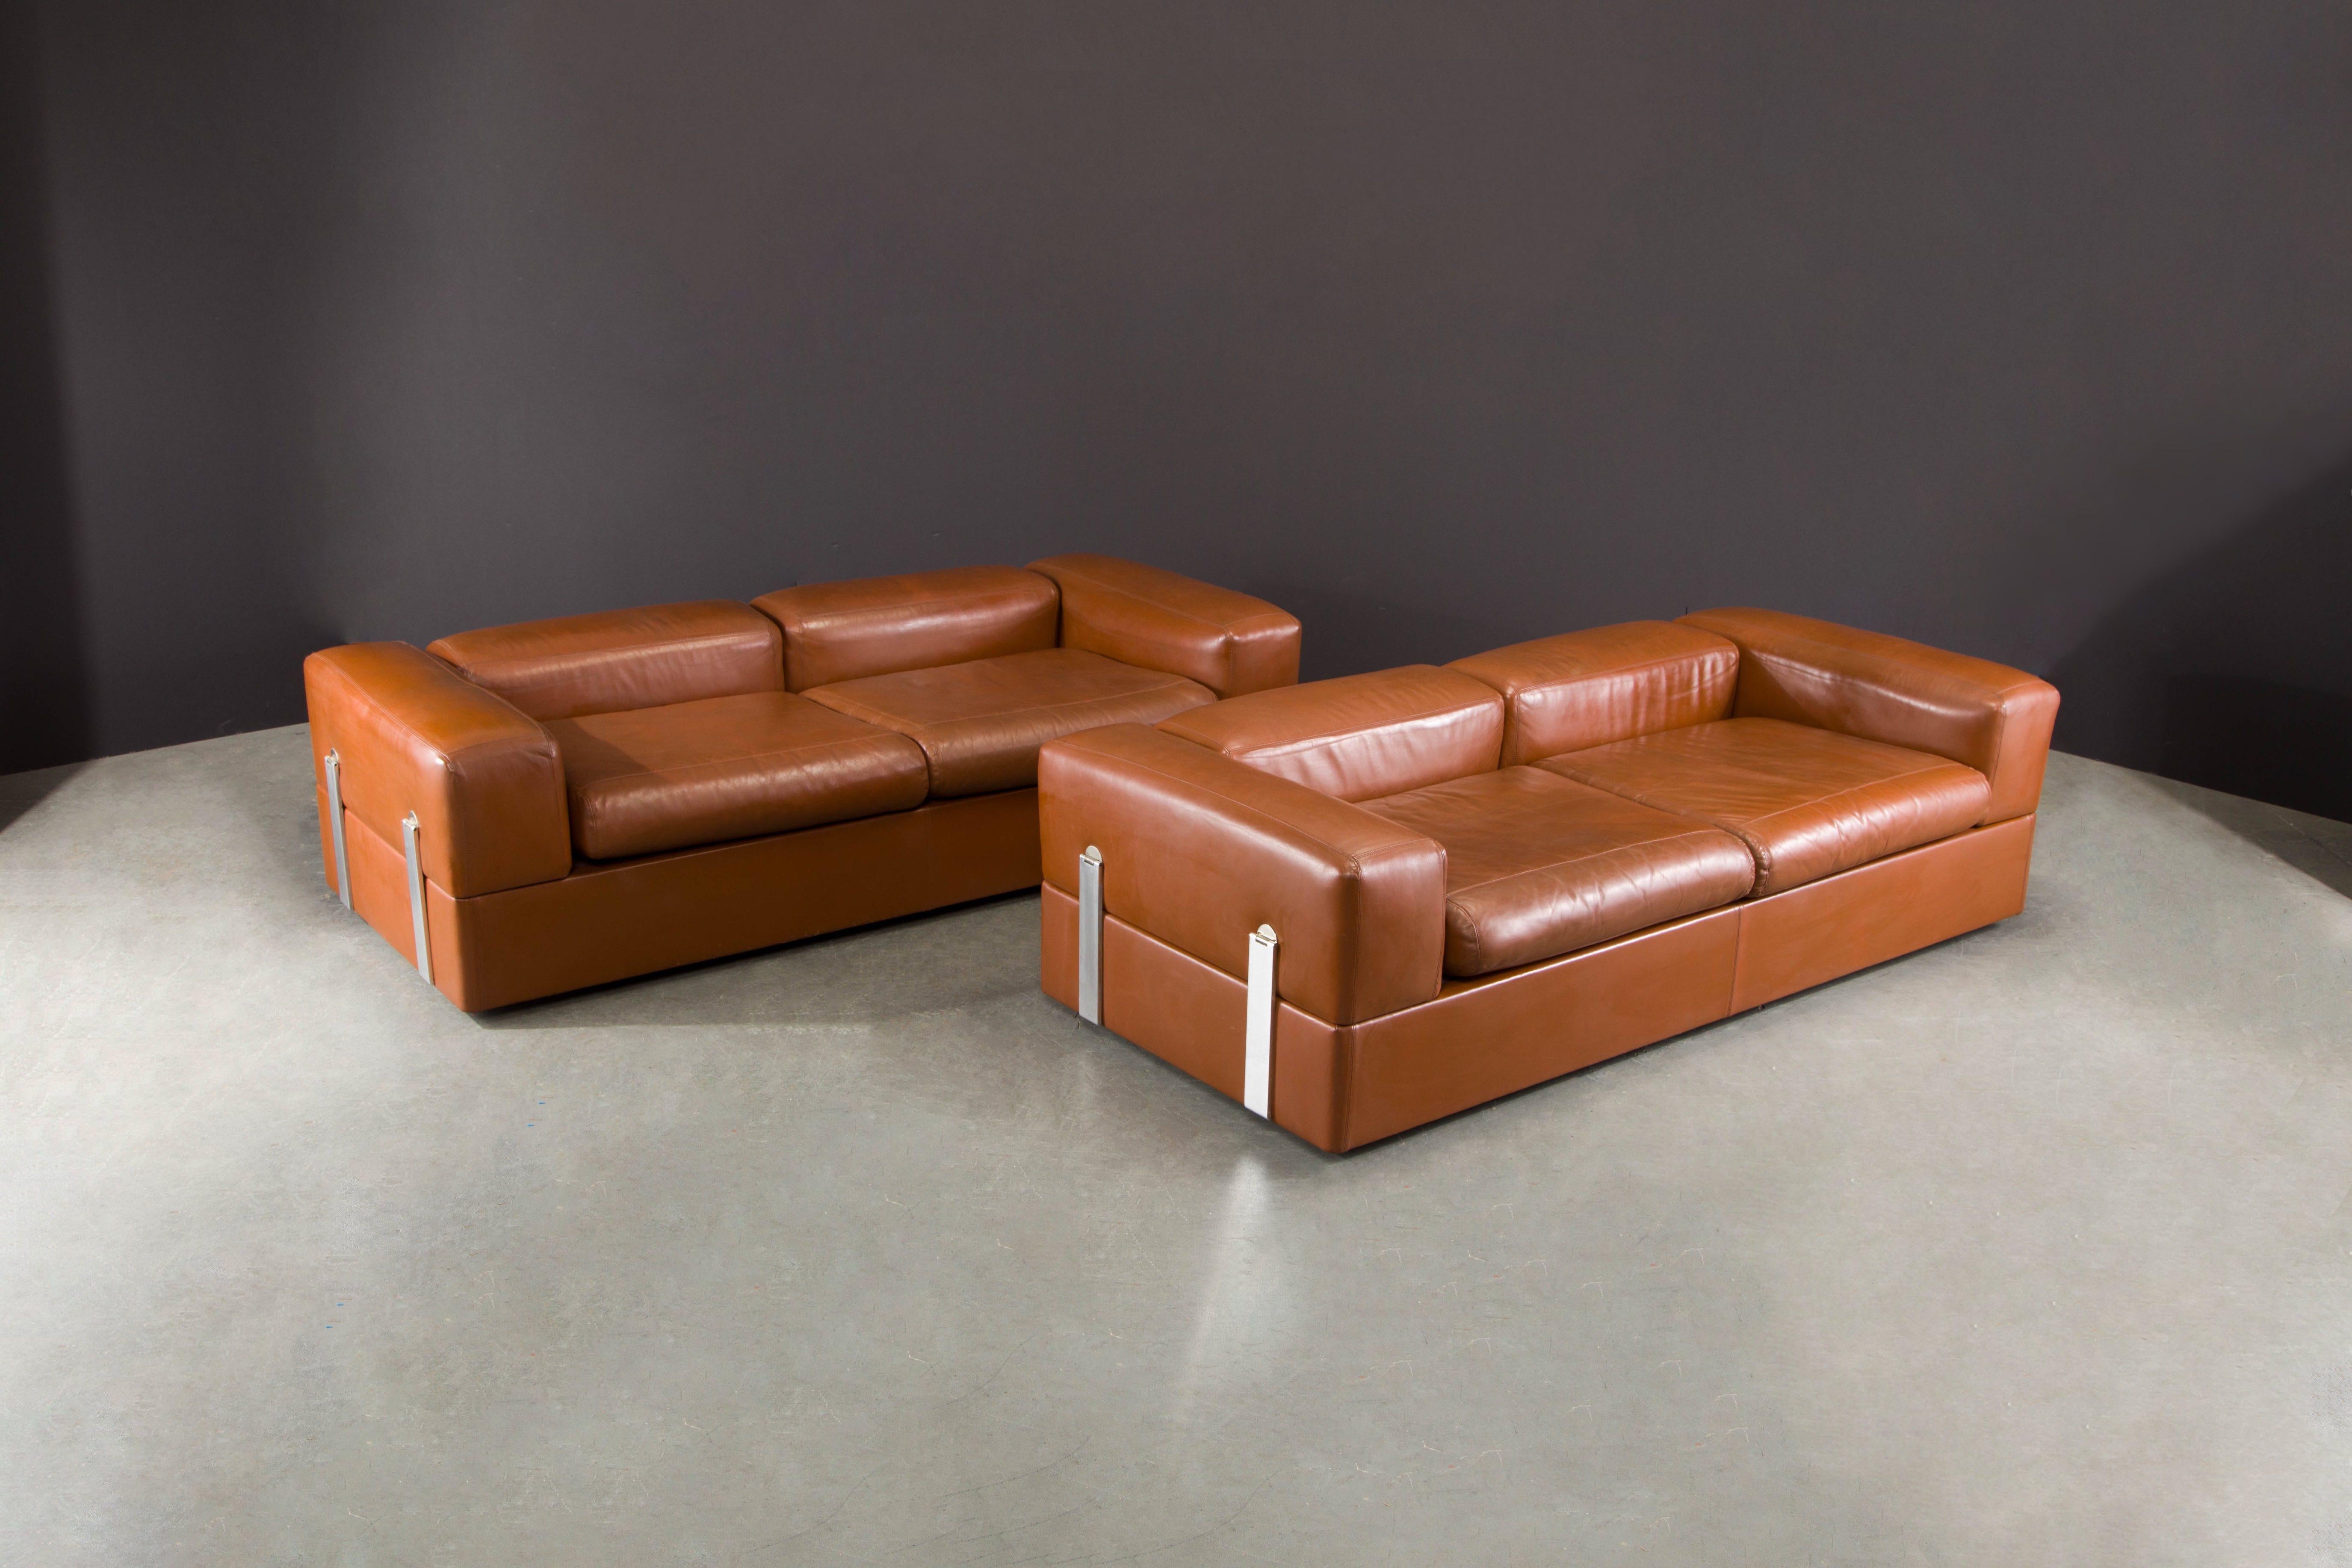 This rare and sought-after Model #711 convertible sofa / bed by Tito Agnoli for Cinova, circa 1960s, features sumptuous cognac leather, sleek steel hardware and built-in white laminated side tables. This innovative design transforms from a